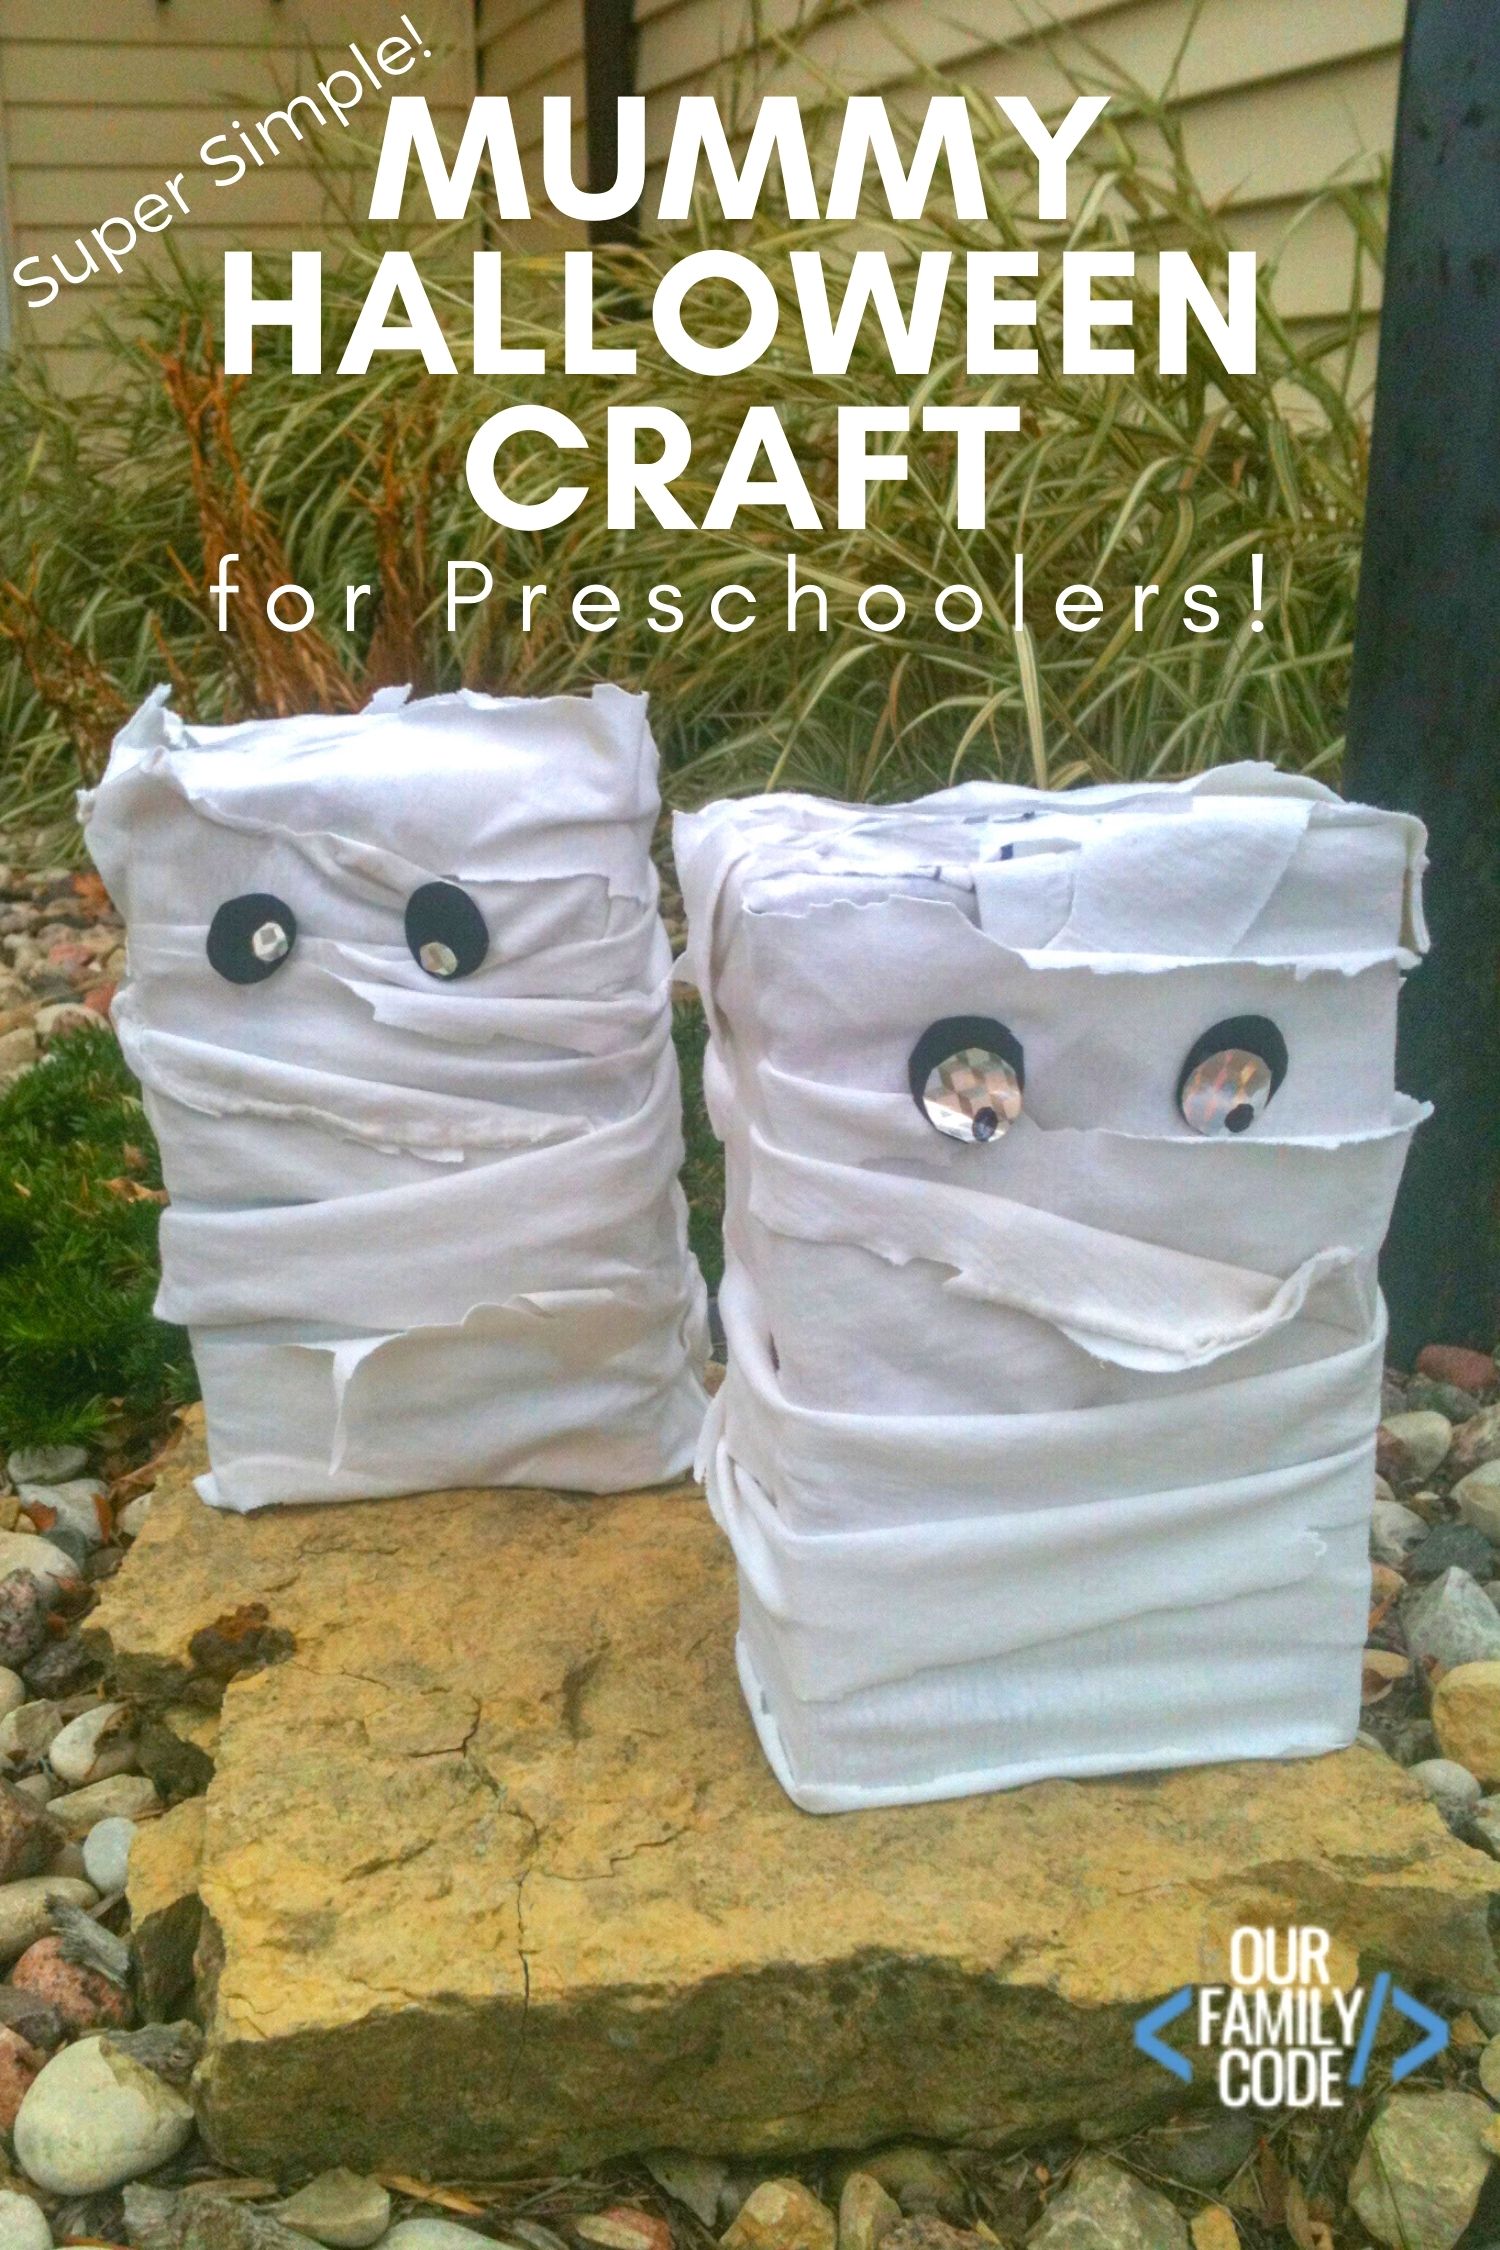 This easy cereal box mummy Halloween craft for preschoolers is perfect for those busy days when you are looking for a simple project to do with your kiddo. The end result is a super cute Halloween decoration that you can put outside or display inside your house. #preschoolcraft #halloweenkidcrafts #kidcraftsforhalloween #easypreschoolercrafts #halloweencrafts #mummyhalloweencraft #DIYhalloweendecoration #easyHalloweendecoration